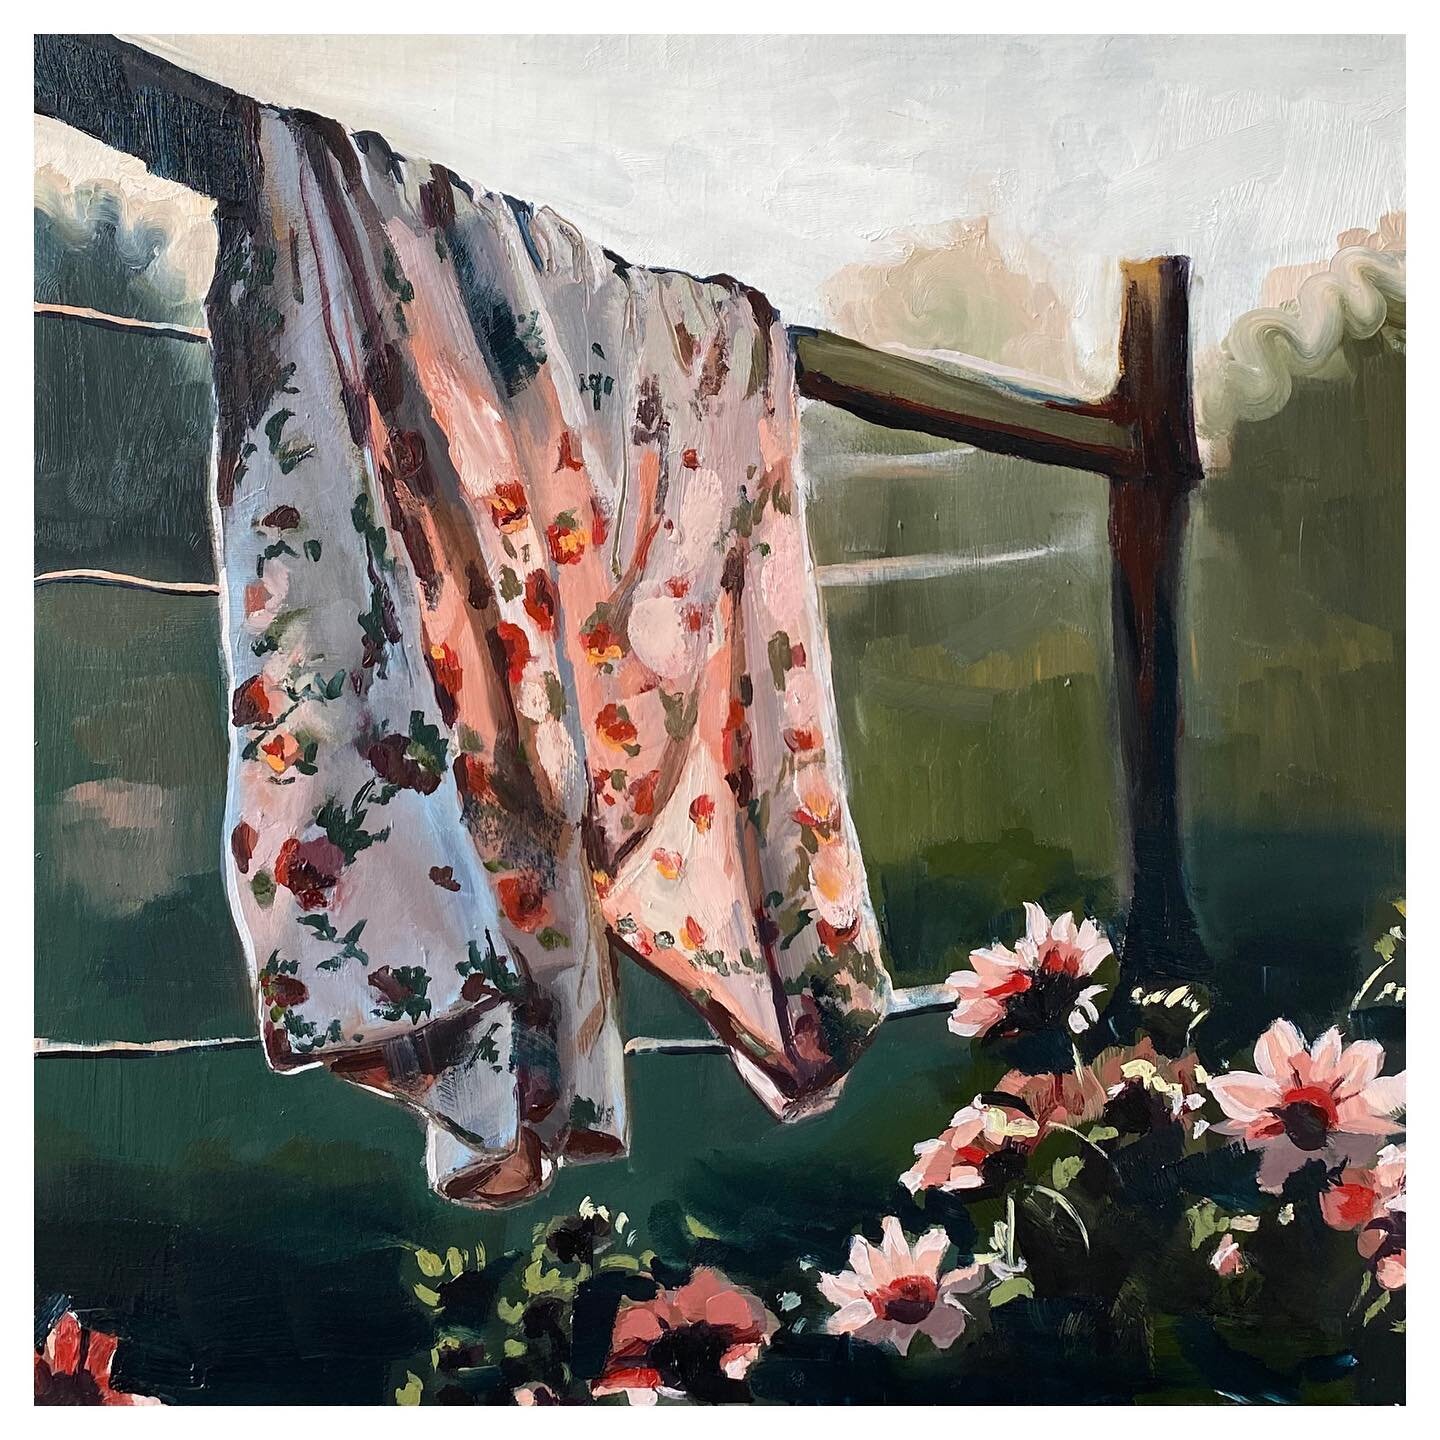 &ldquo;fresh air,&rdquo; finished just in time for #artawhirl this weekend 🙌

#artawhirl2023 #oilpainting #northeastminneapolis #mpls #minneapolis #mplsart #stilllife #flowerart #flowerpainting #flowers #northrupkingbuilding #clothesline #aireferenc